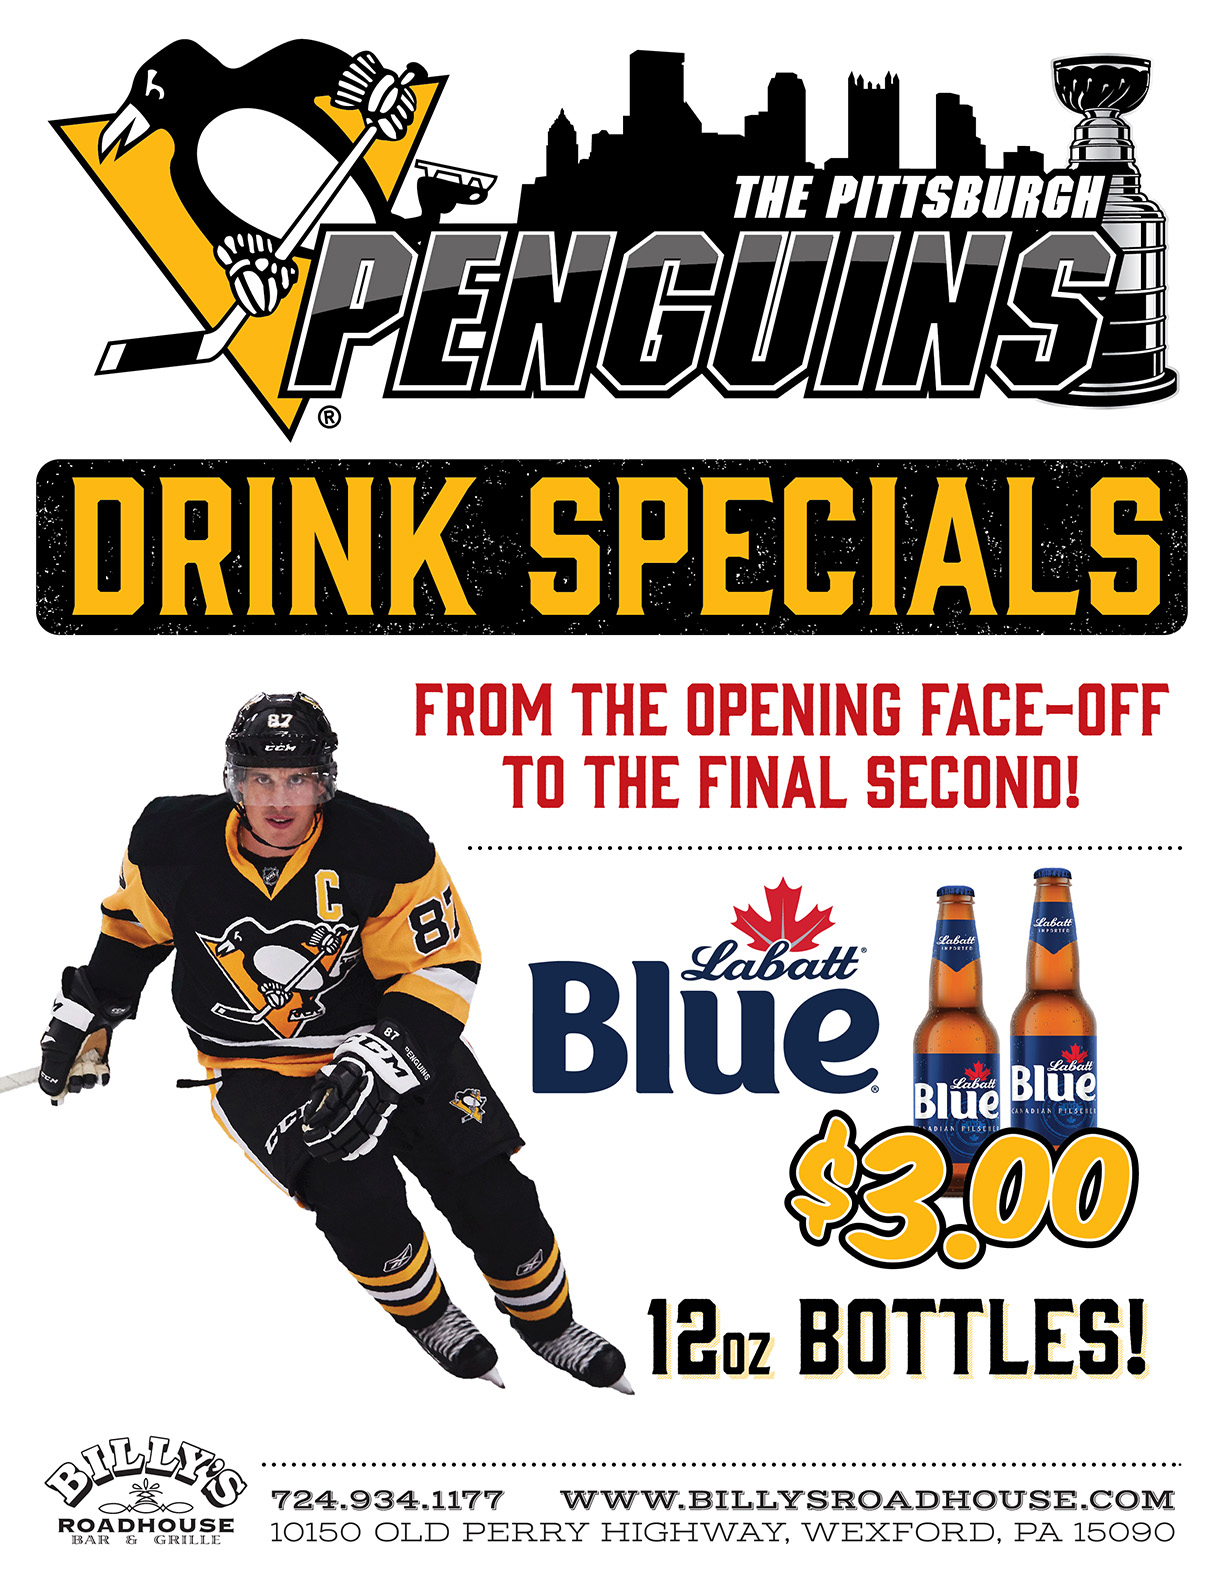 Billy's Roadhouse Specials for Pens Games!